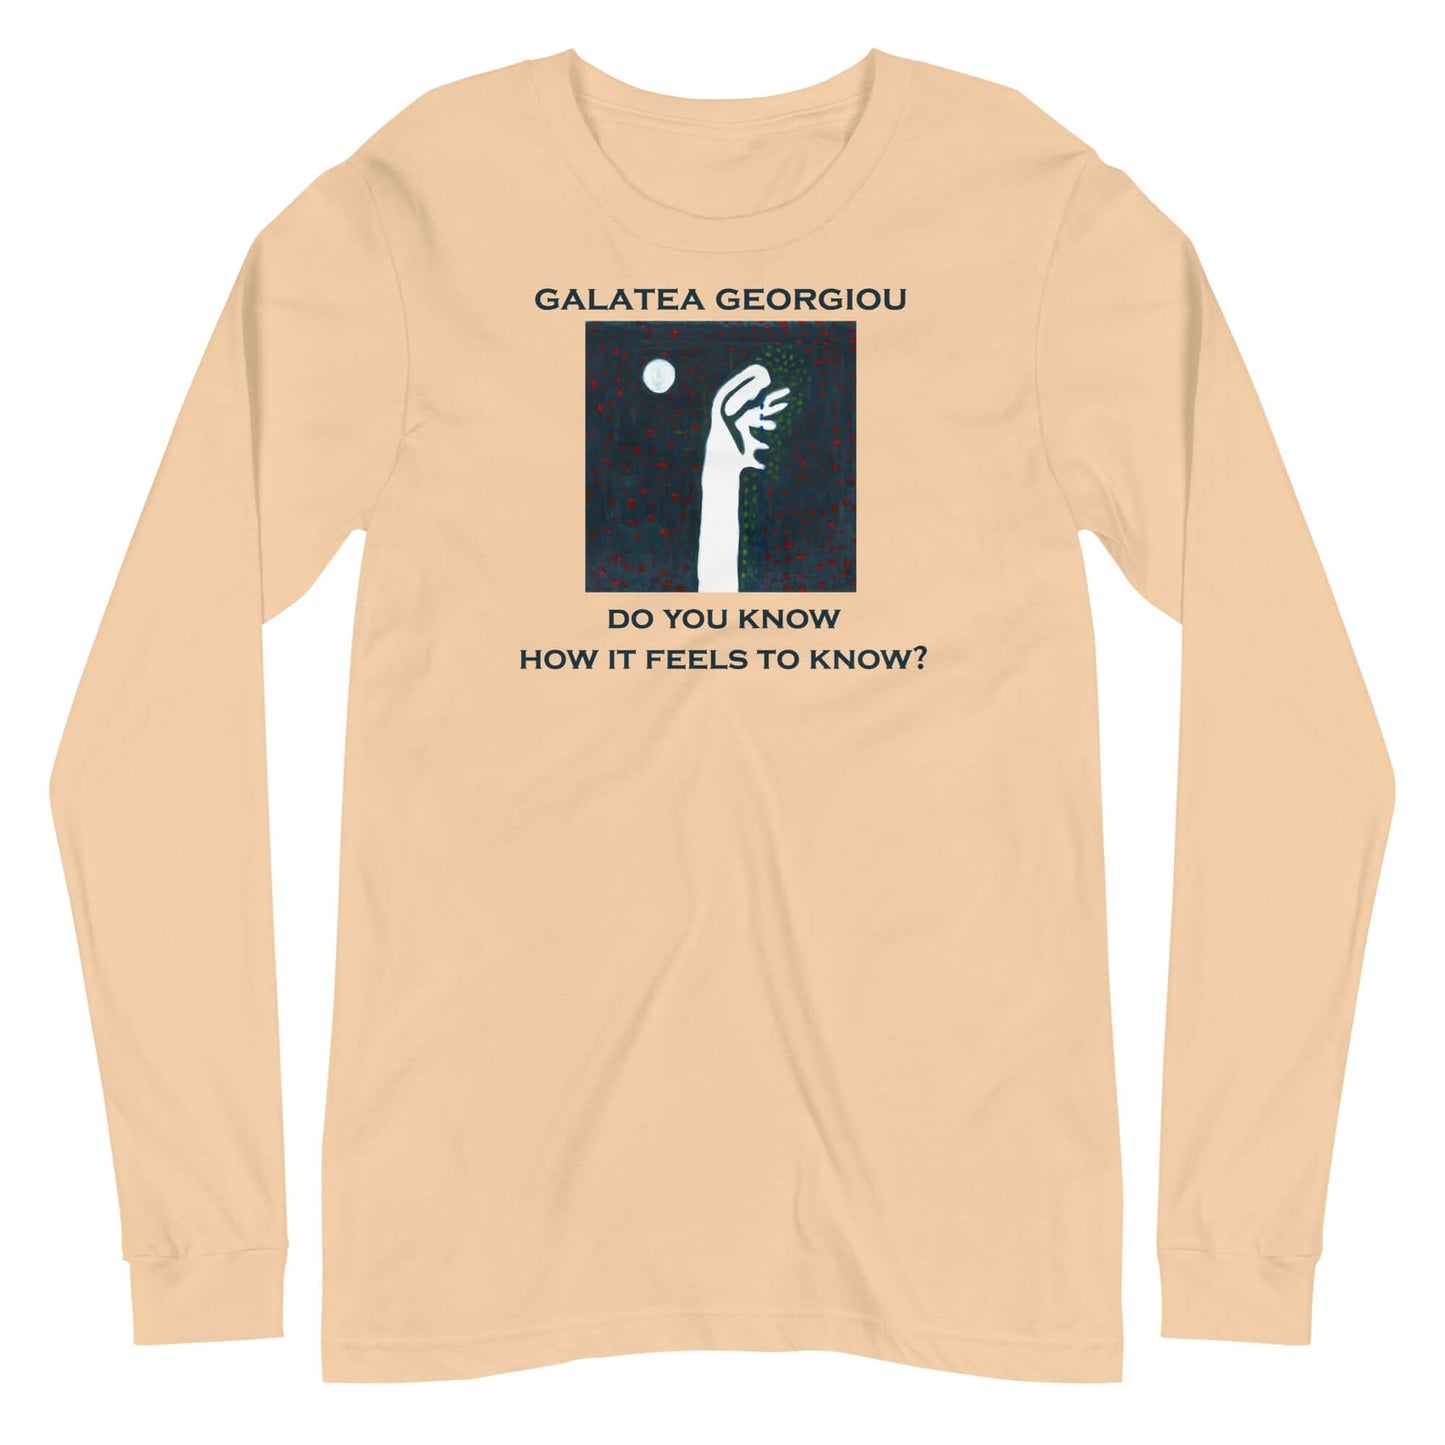 How it Feels to Know - Unisex Long Sleeve Tee